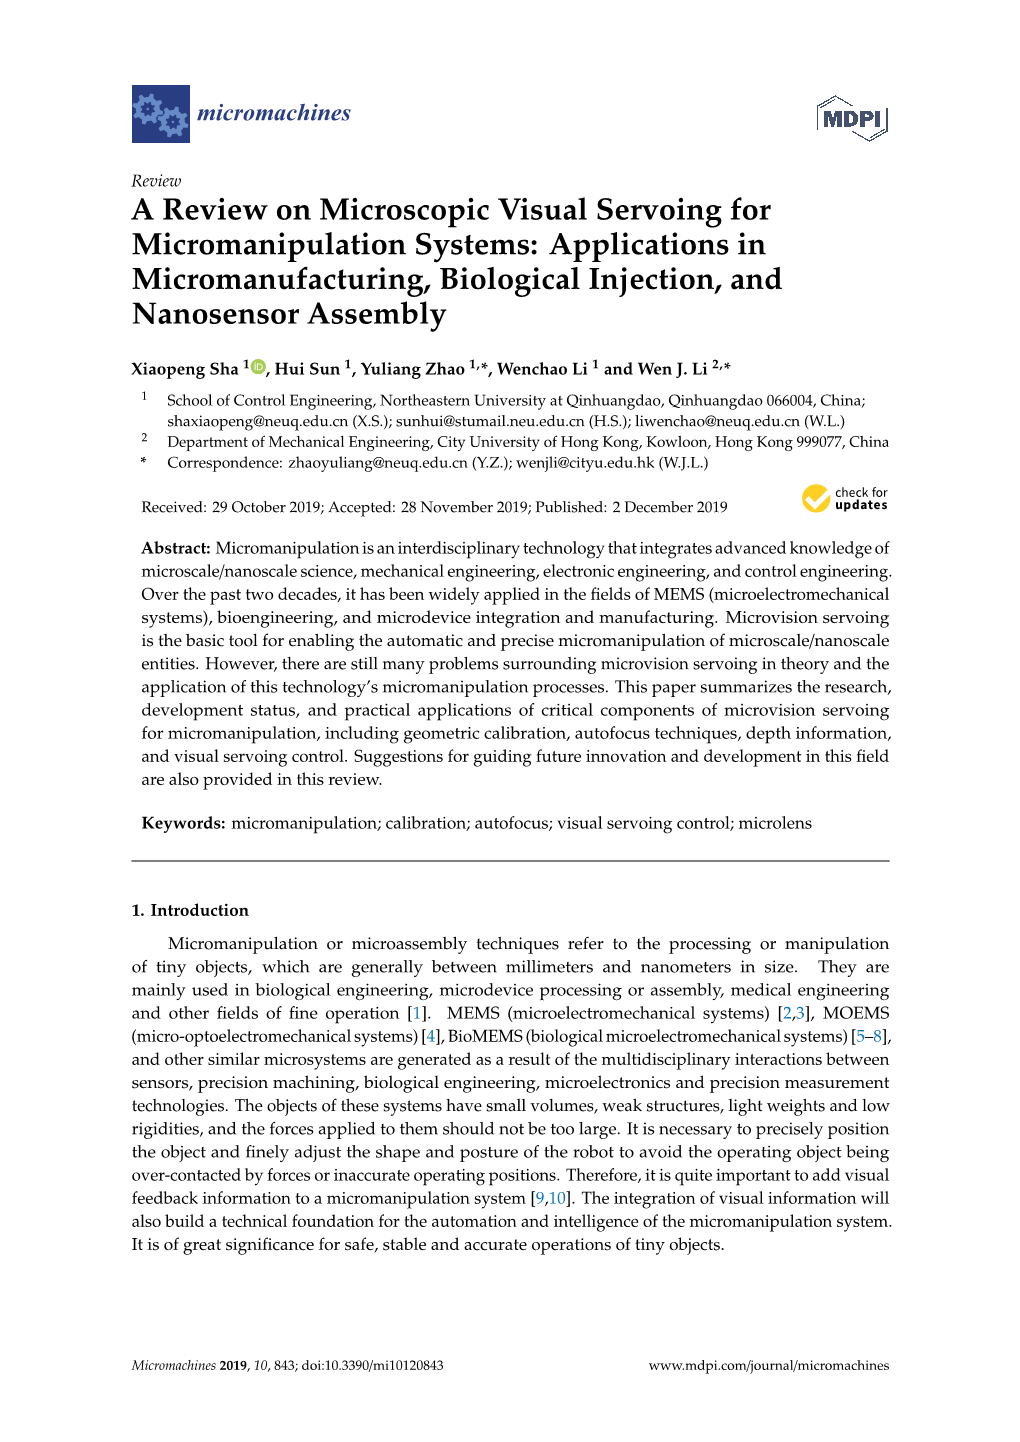 A Review on Microscopic Visual Servoing for Micromanipulation Systems: Applications in Micromanufacturing, Biological Injection, and Nanosensor Assembly